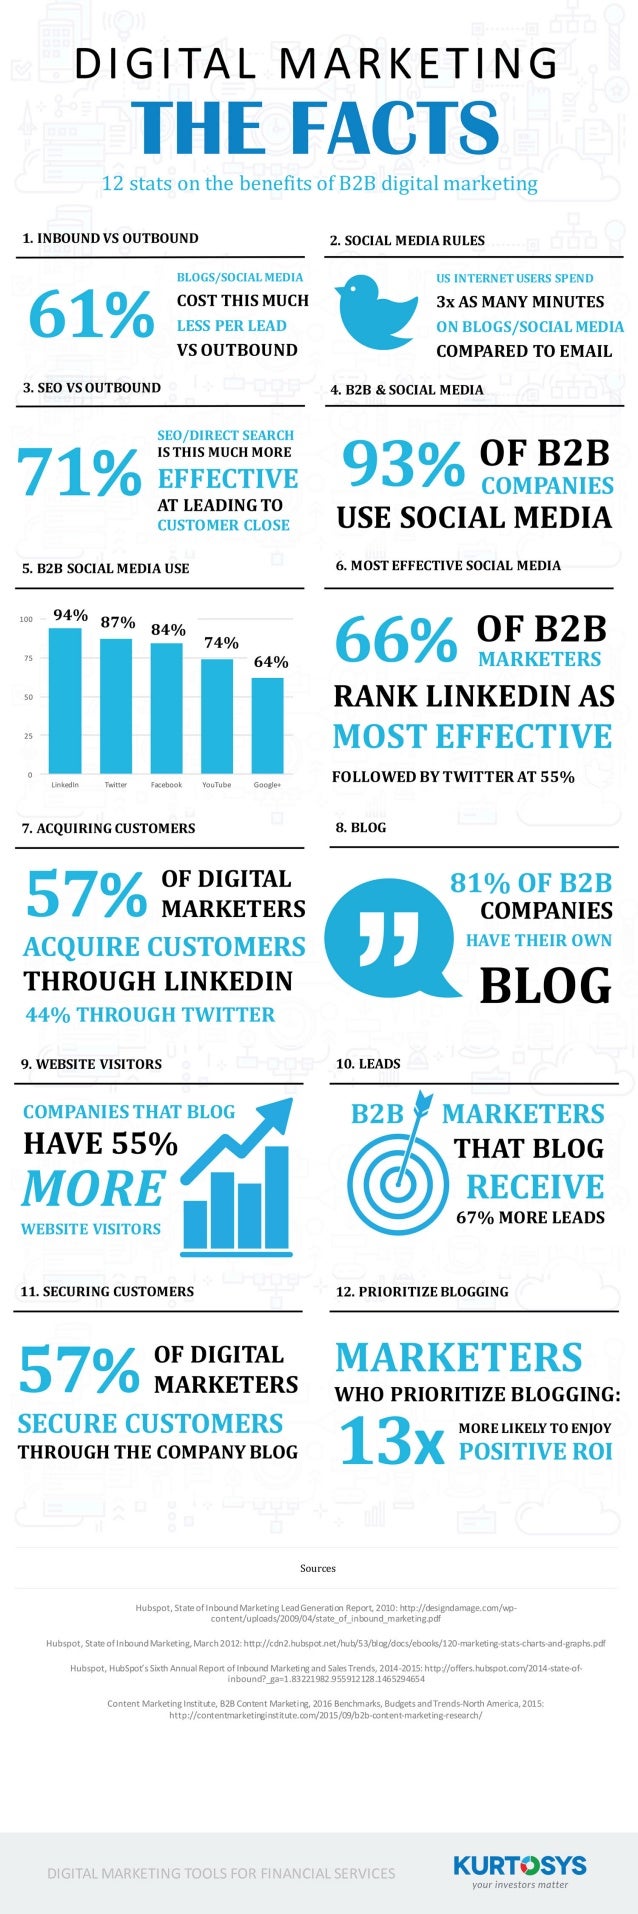 12 Facts About B2B Digital Marketing [INFOGRAPHIC]